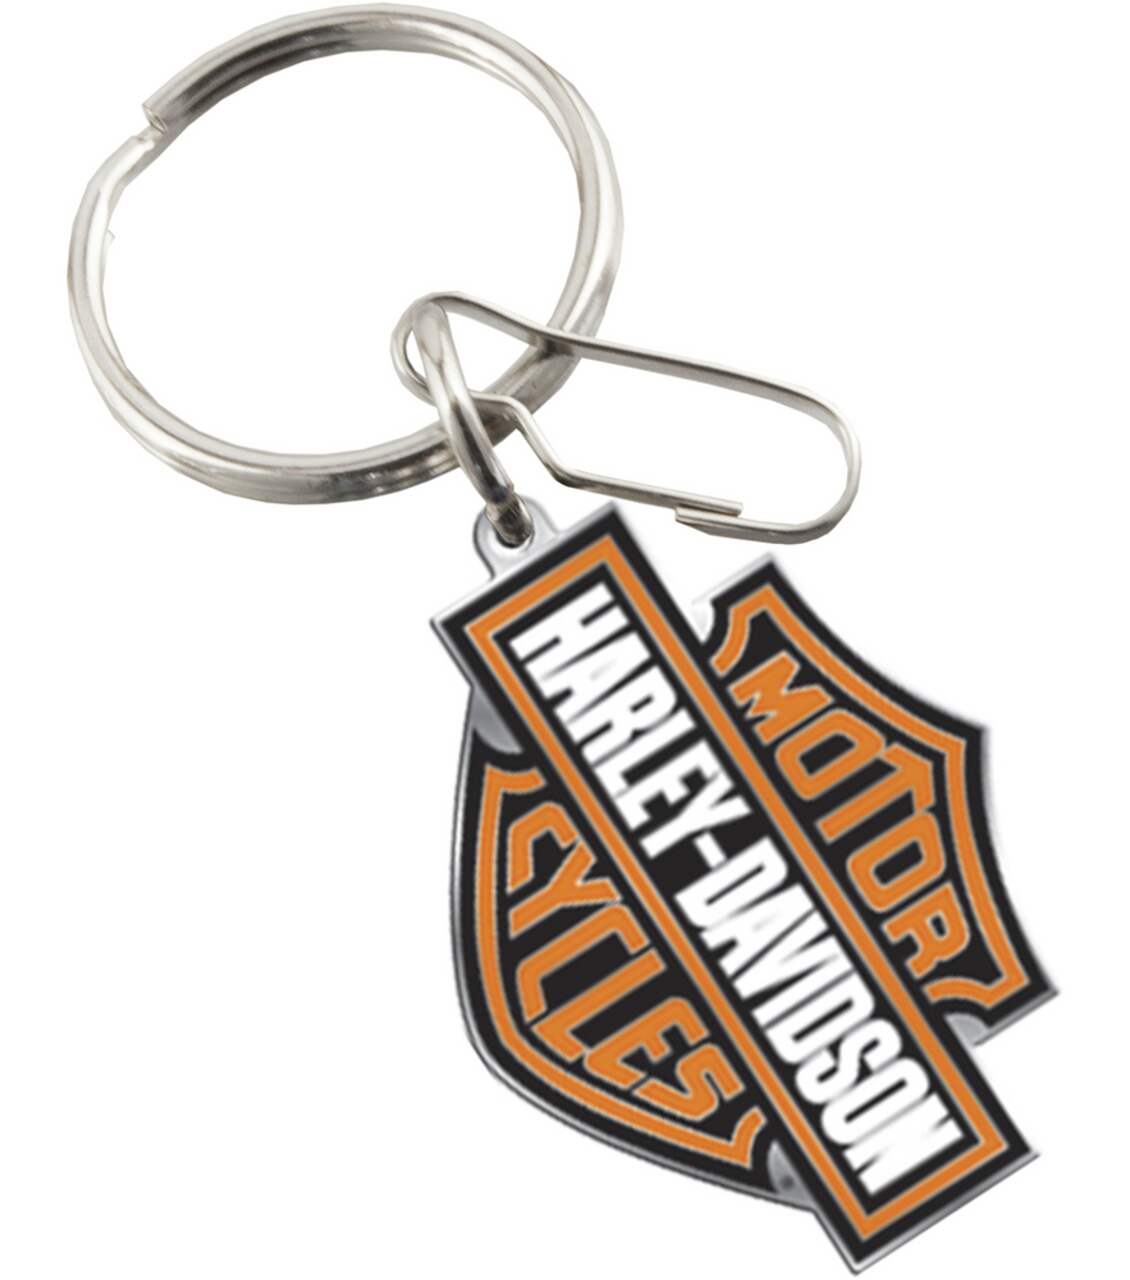 https://media-www.canadiantire.ca/product/automotive/car-care-accessories/auto-accessories/0372759/harley-davidson-keychain-1c93dc9a-358d-4bb4-92d5-8148df18037d.png?imdensity=1&imwidth=640&impolicy=mZoom